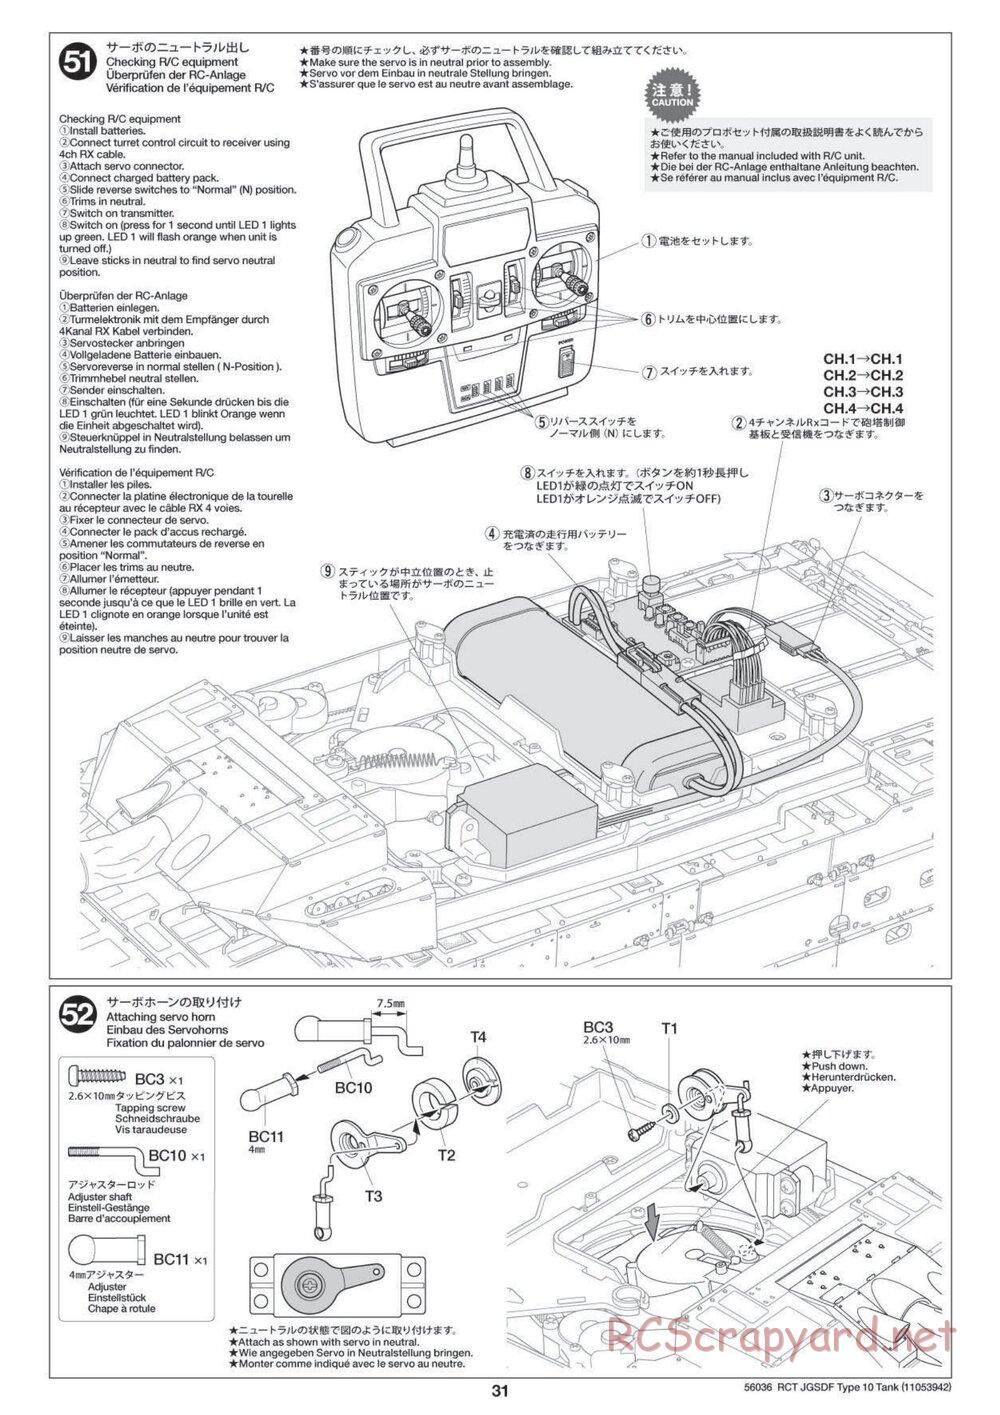 Tamiya - JGSDF Type 10 Tank - 1/16 Scale Chassis - Manual - Page 31